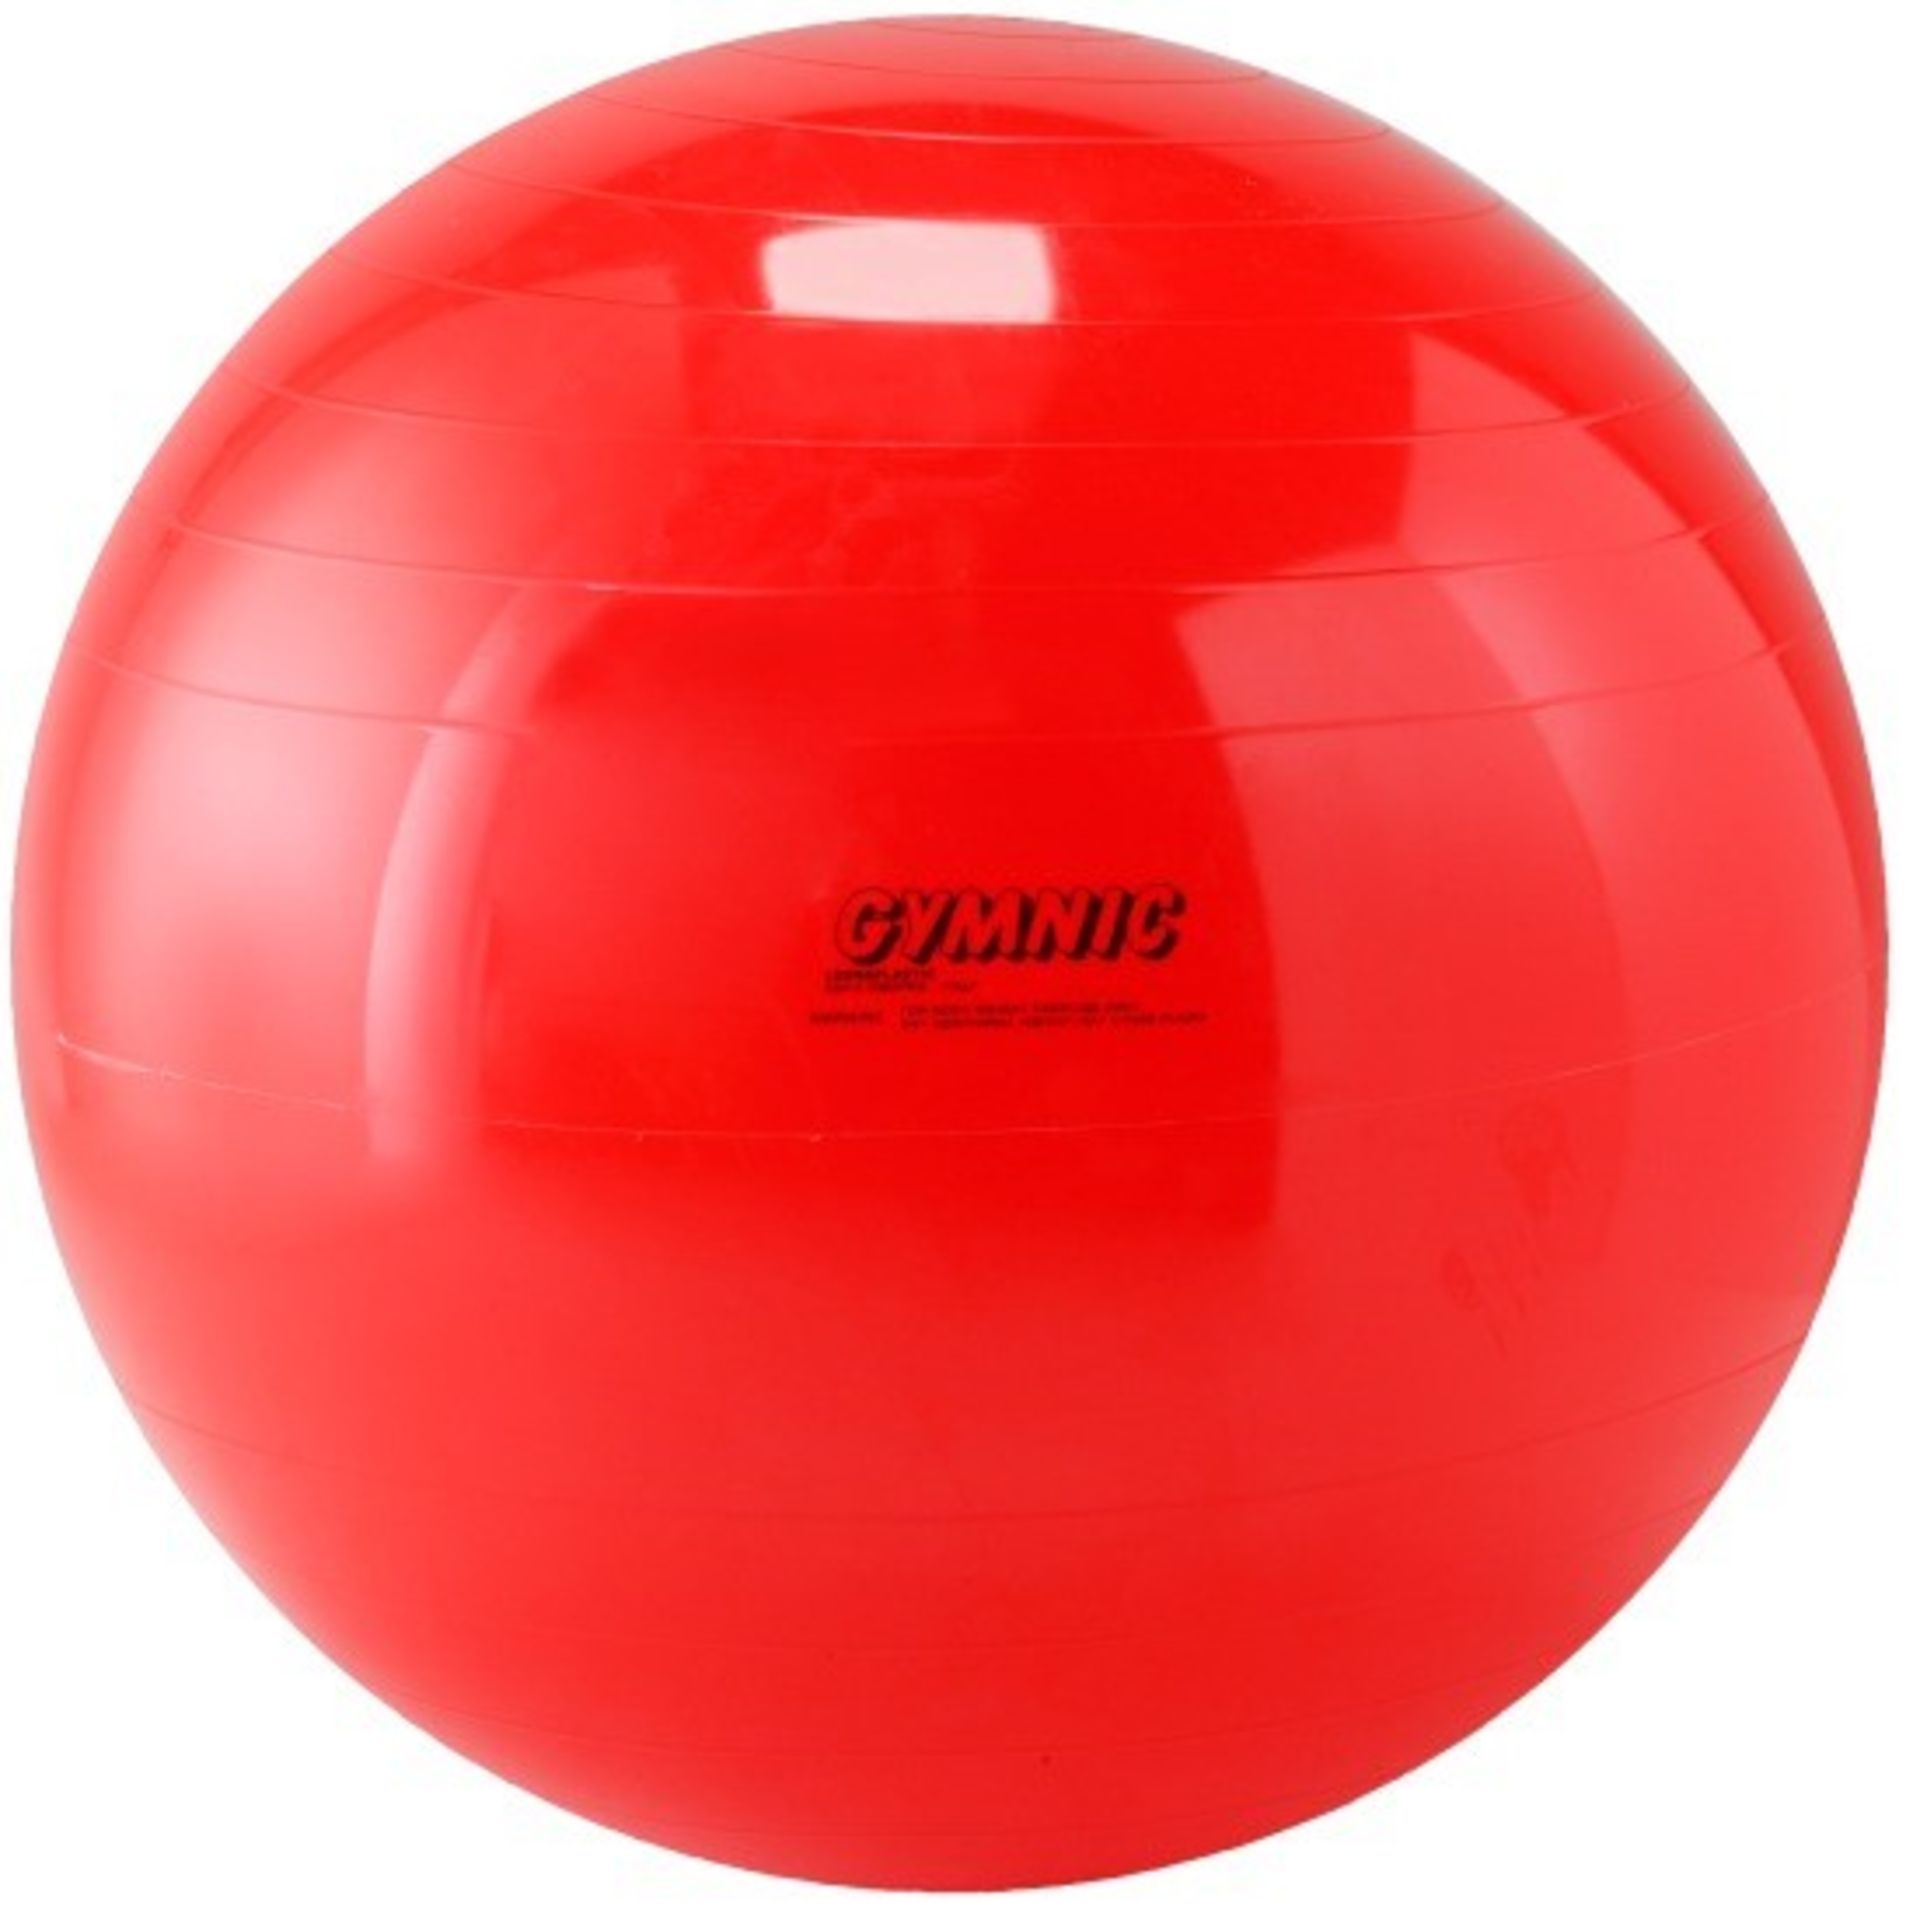 ME : 1 AS NEW BAGGED PHYSIO GYMNIC EXERCISE BALL - 82CM DIAMETER - RED / RRP £32.95 (VIEWING